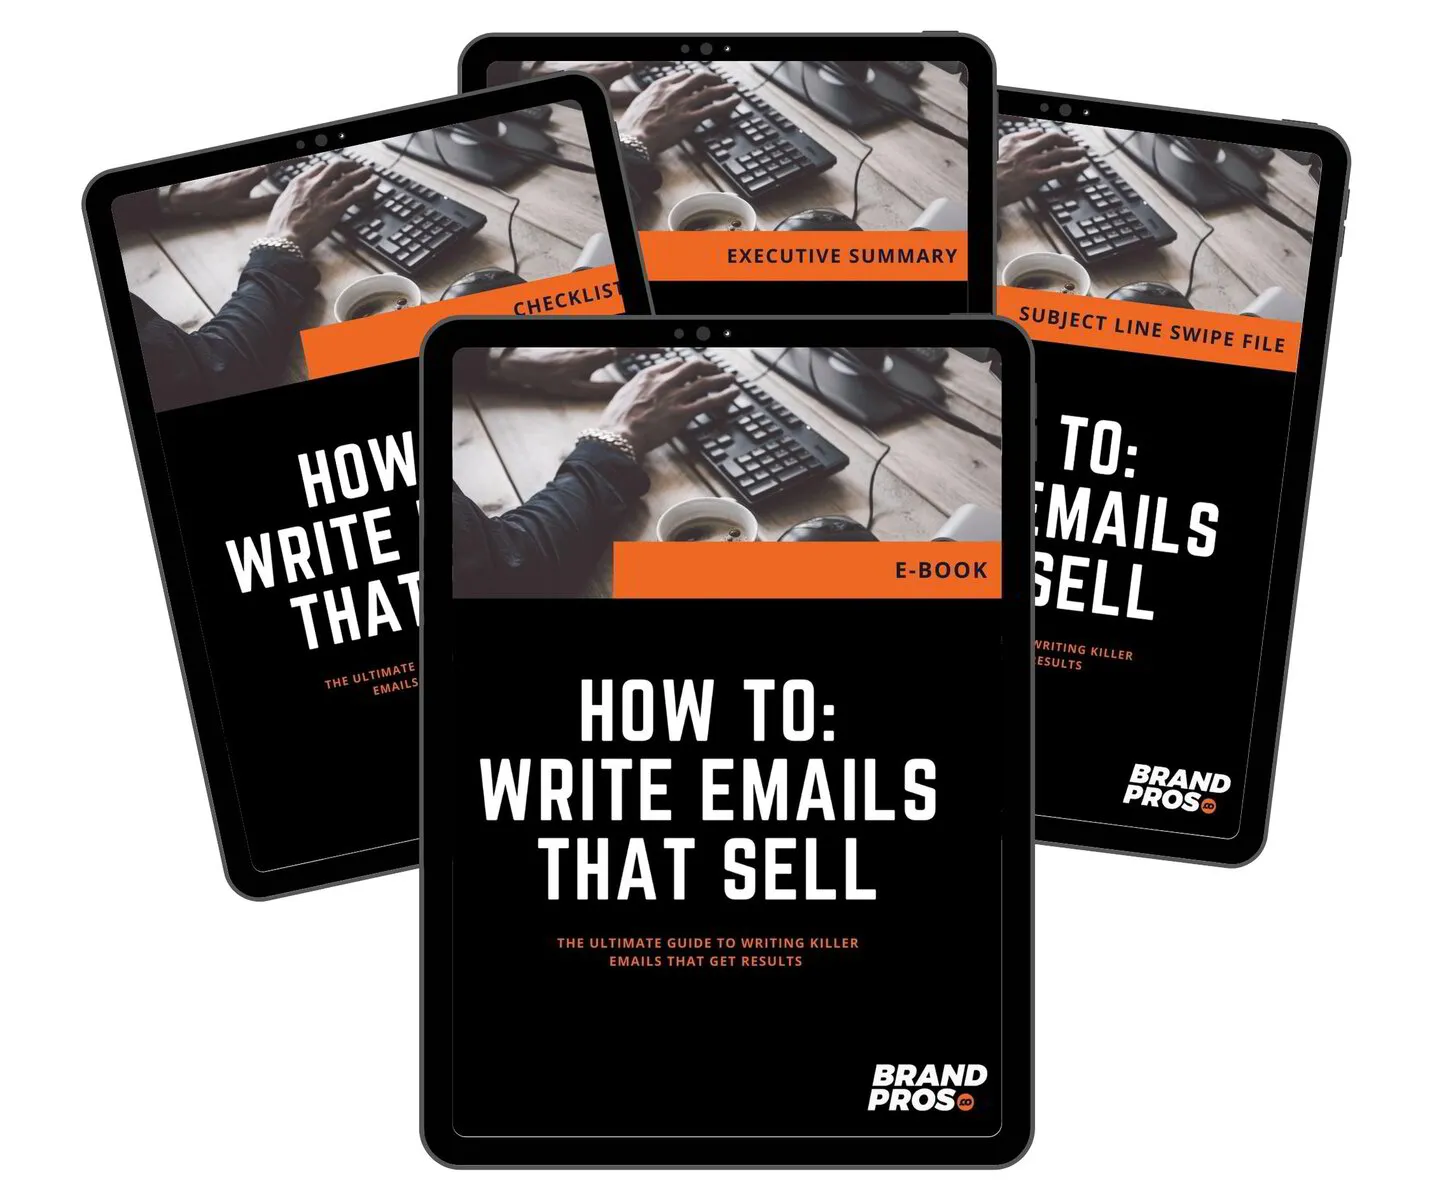 How to Write Emails That Sells Bundle (Brand Pros)